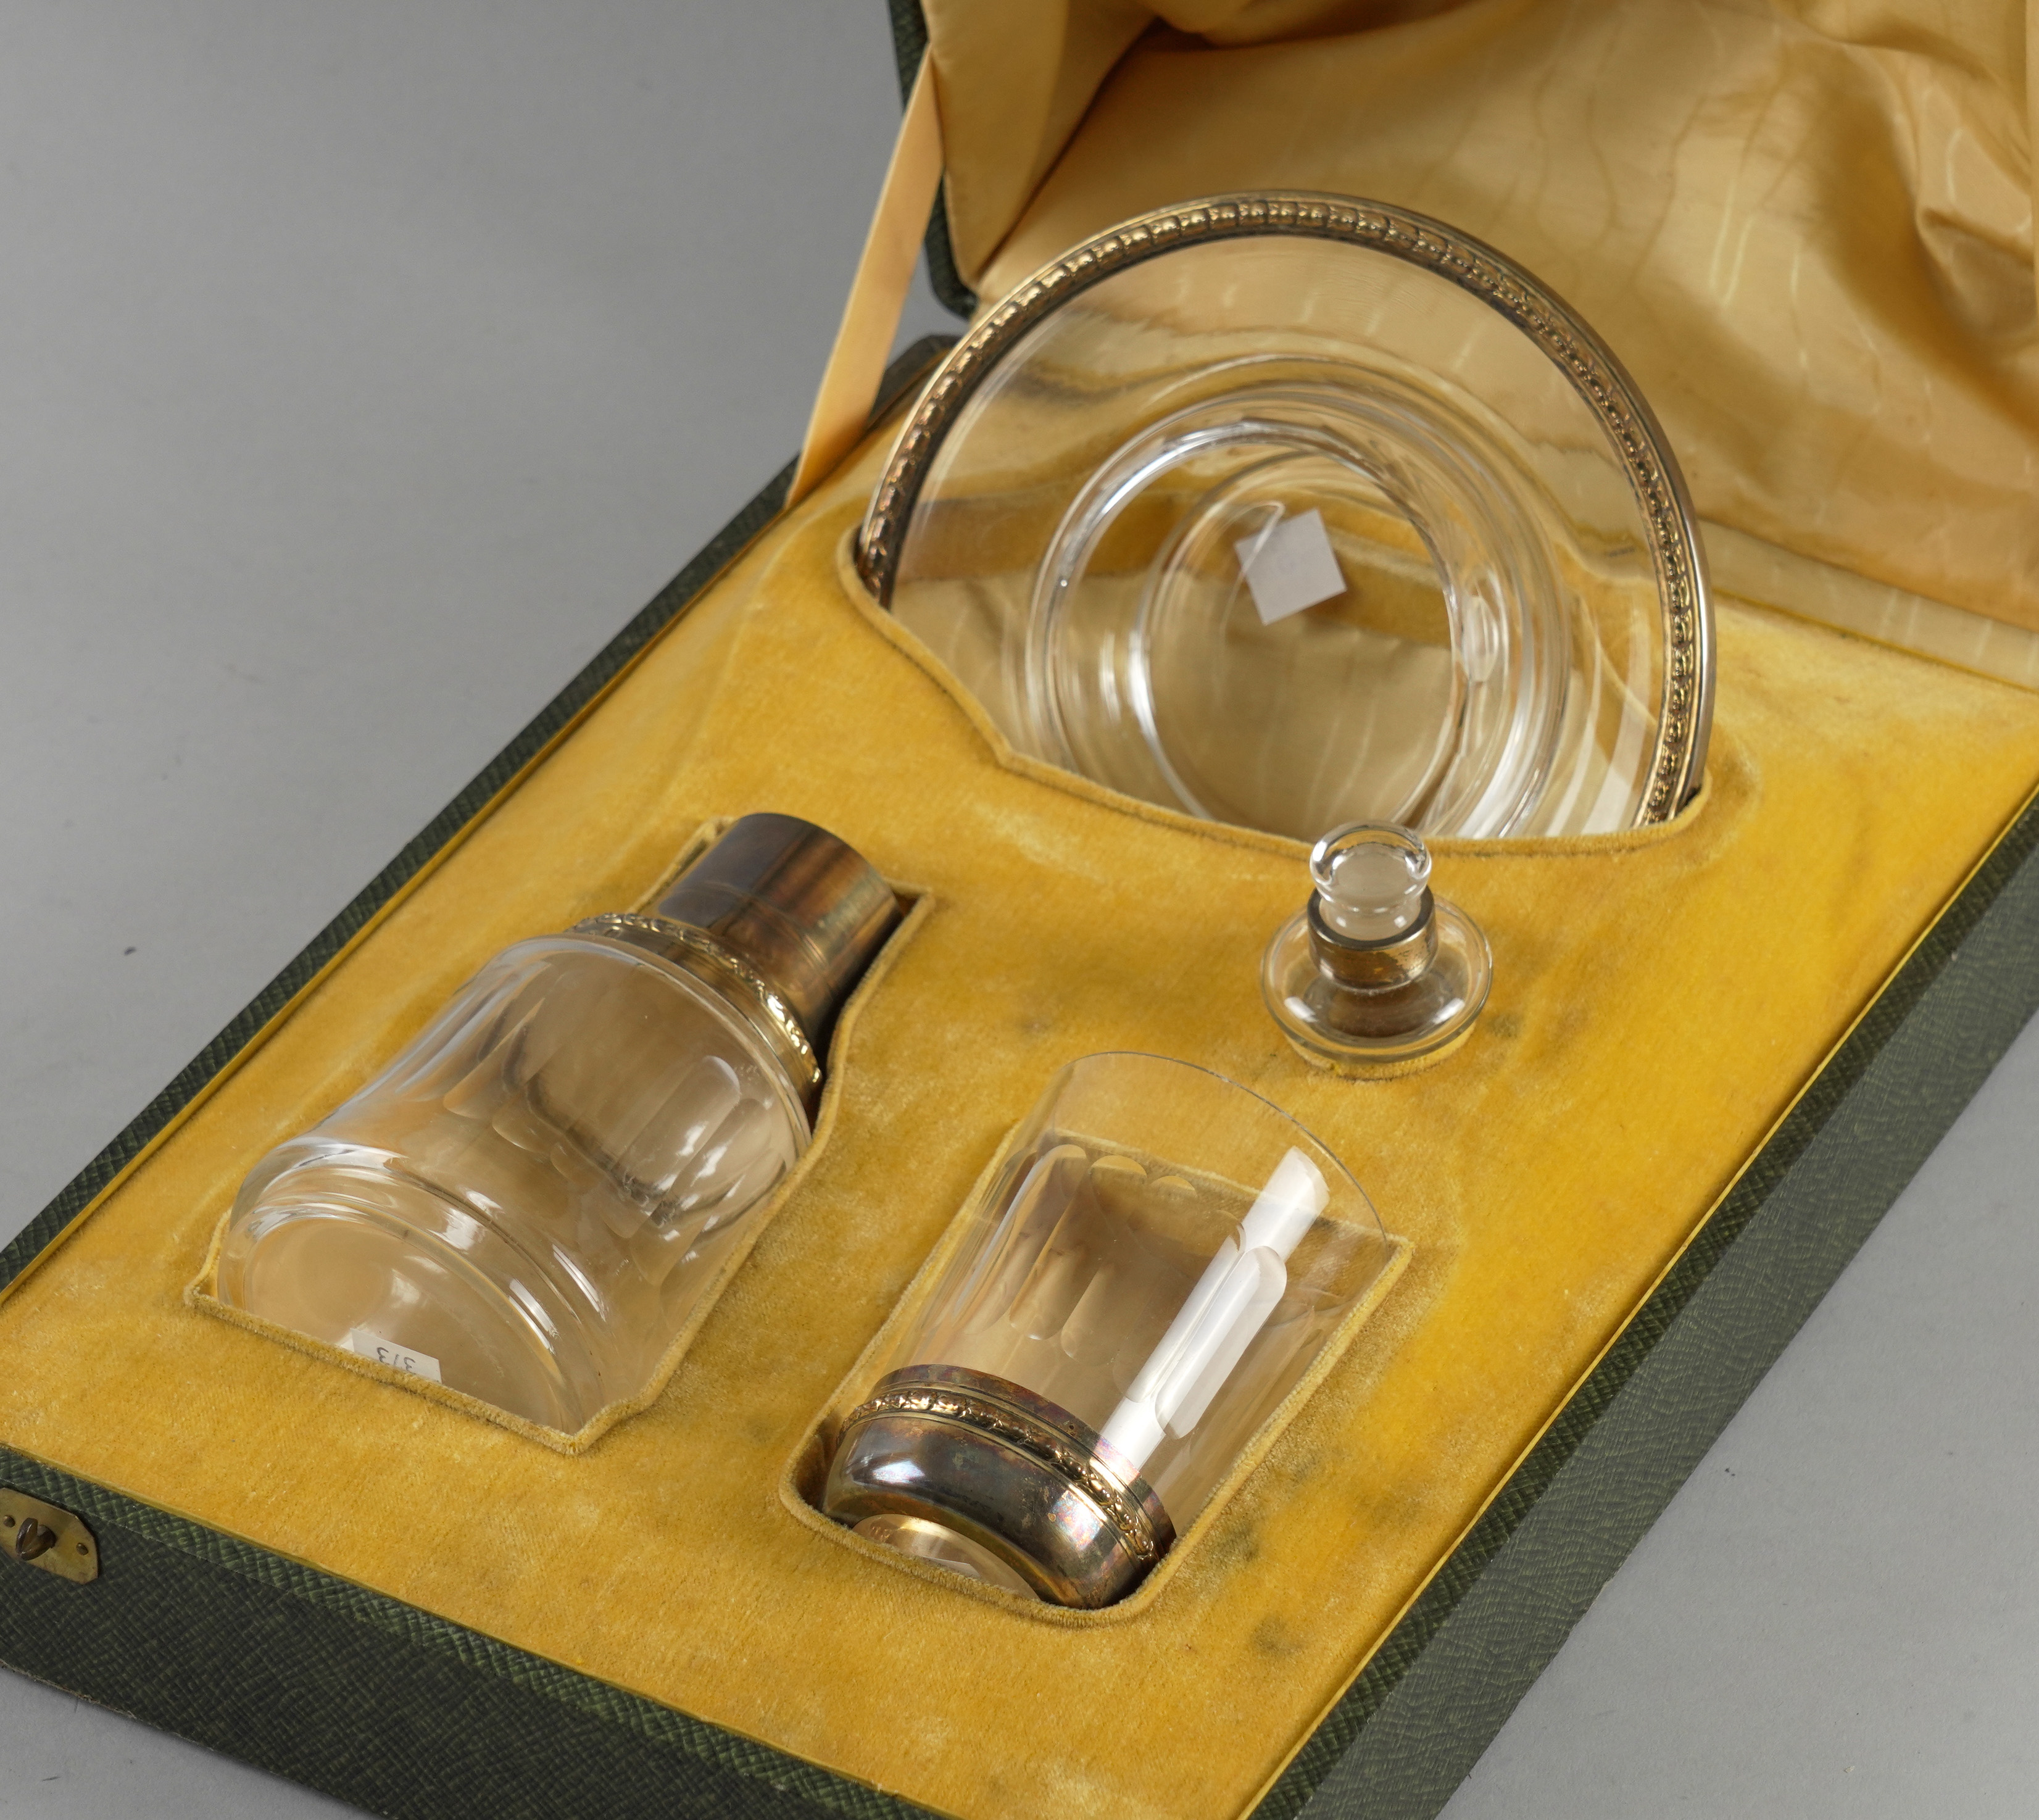 A FRENCH SILVER GILT MOUNTED GLASS CARAFE SET - Image 2 of 2